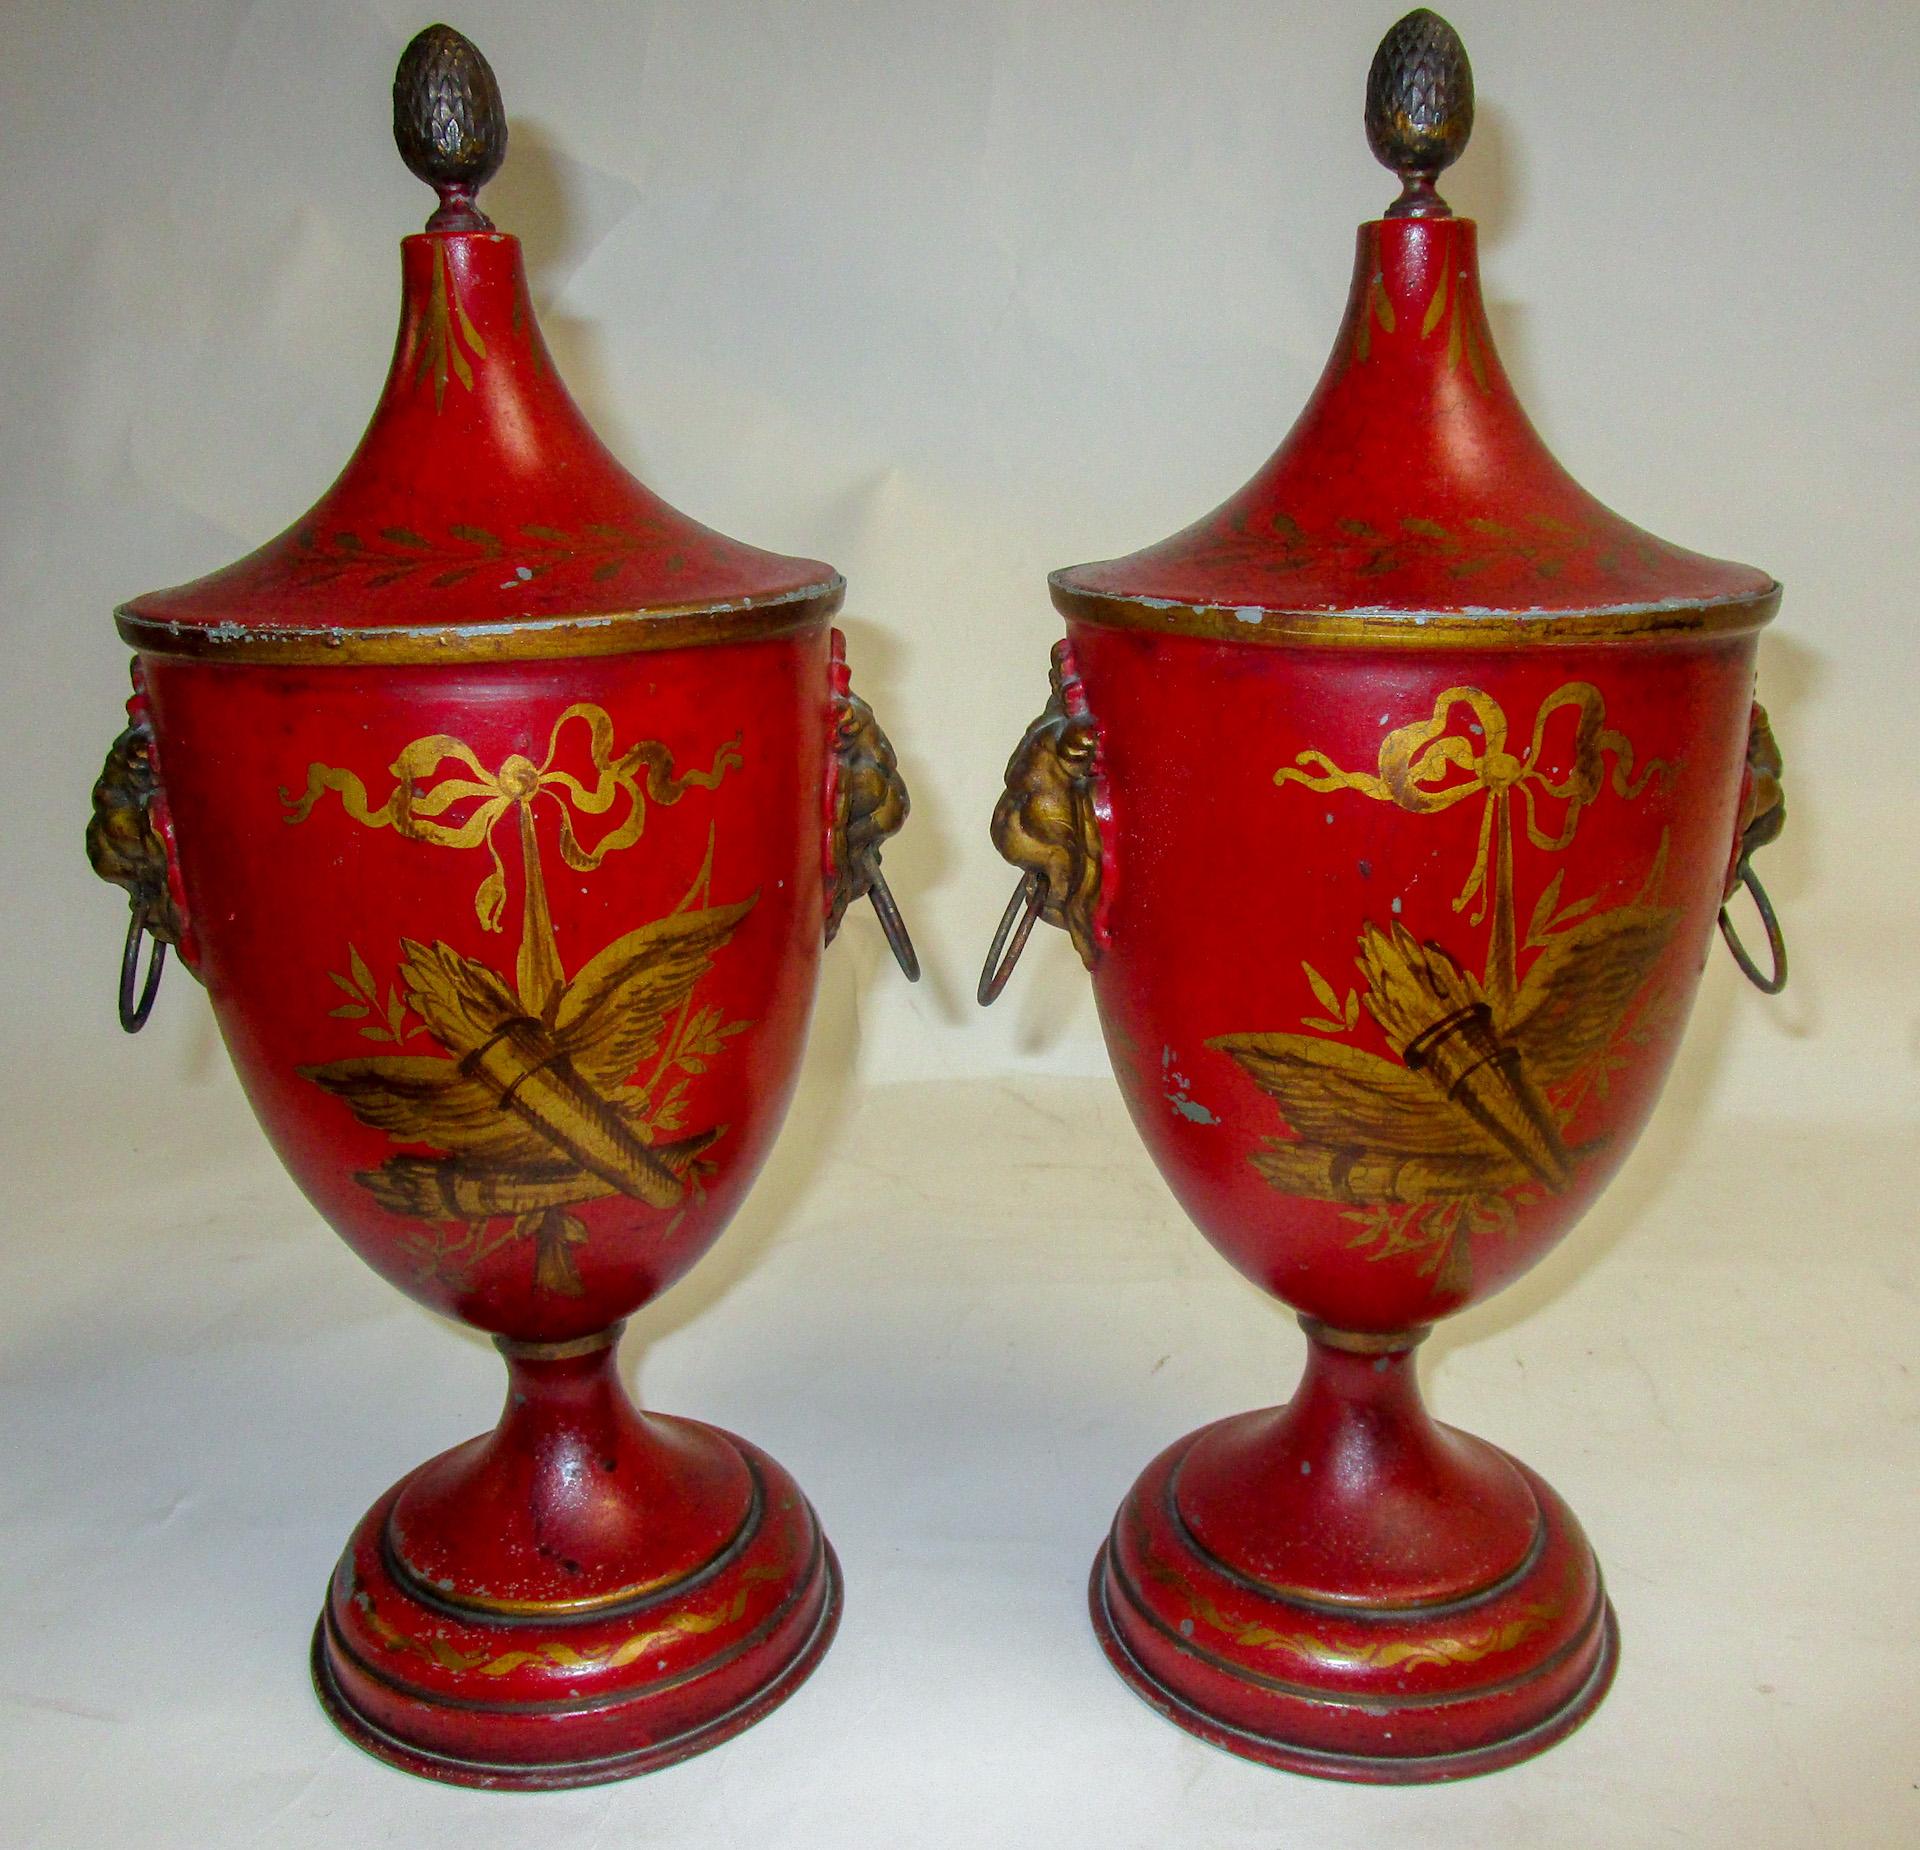 This very handsome pair of French toleware lidded urns, in a deep red color with gold gilt accents, feature lion head handles on either side and artichoke finials atop the lids. Each urn is intricately hand painted with a different scene of